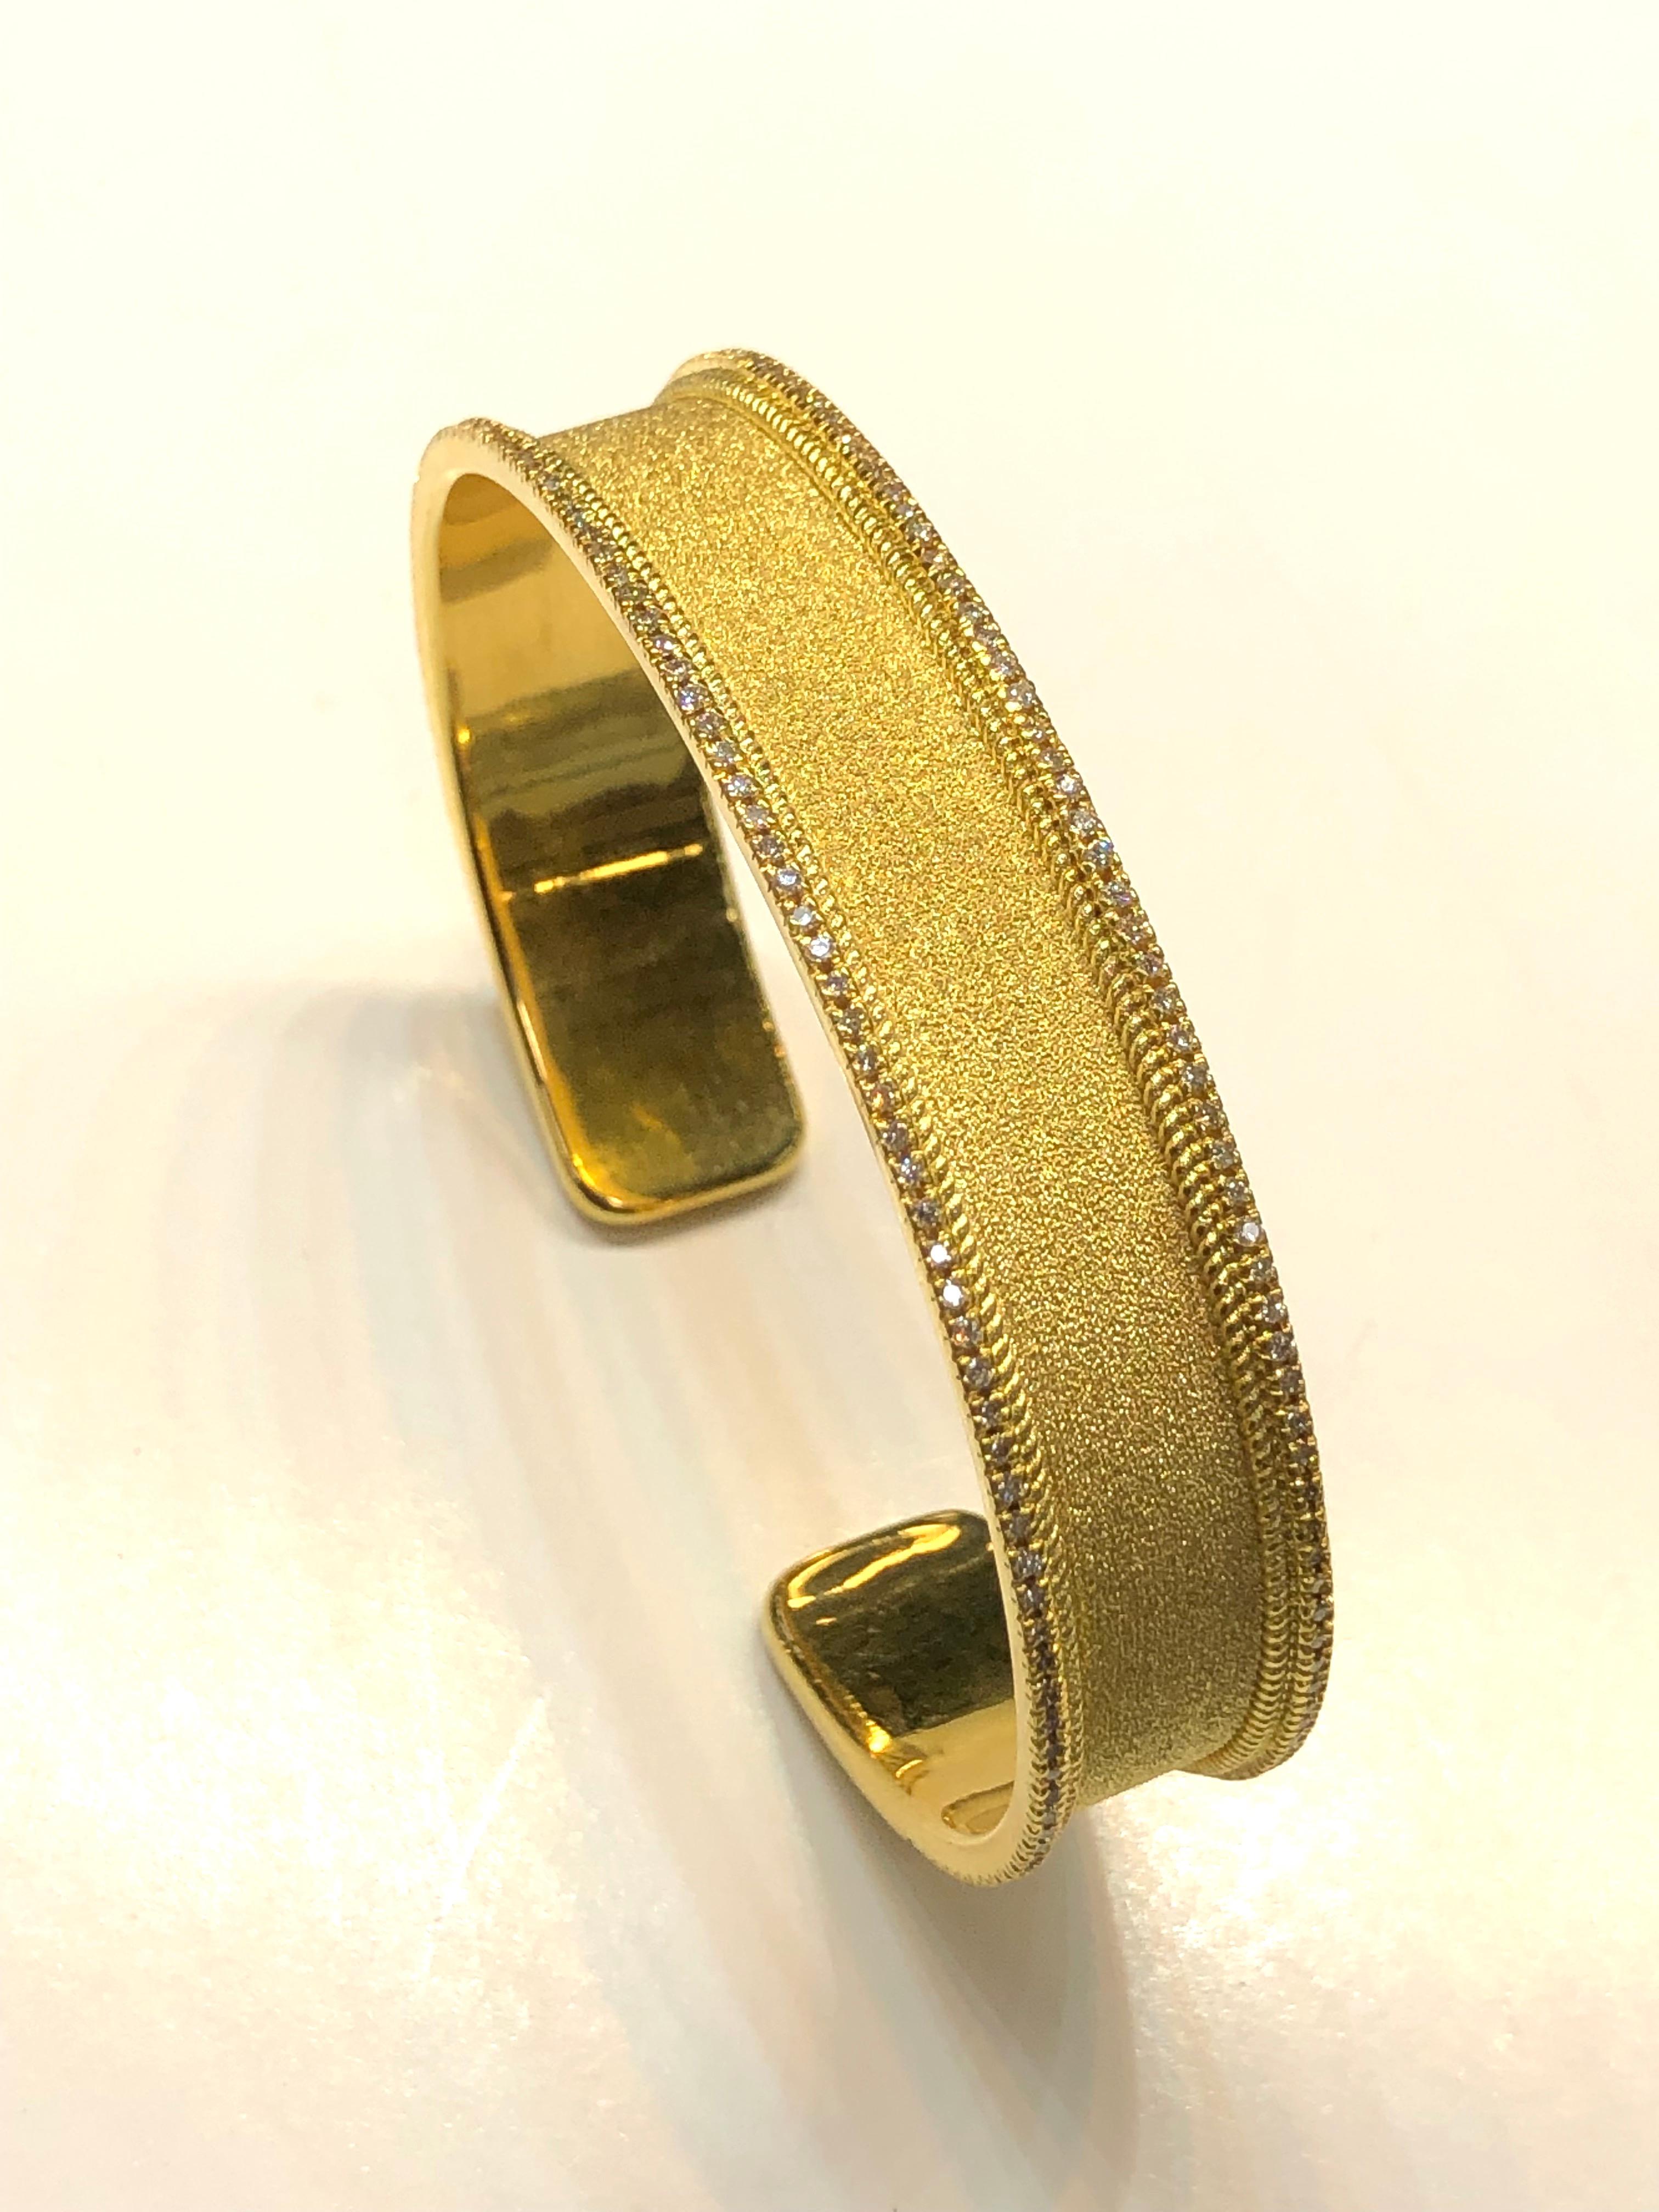 S.Georgios designer bangle bracelet hand made in 18 Karat yellow gold. This bracelet is finished in Byzantine style with the unique velvet look on the background. The bracelet features brilliant cut white diamonds total weight of 0.86 Carat around